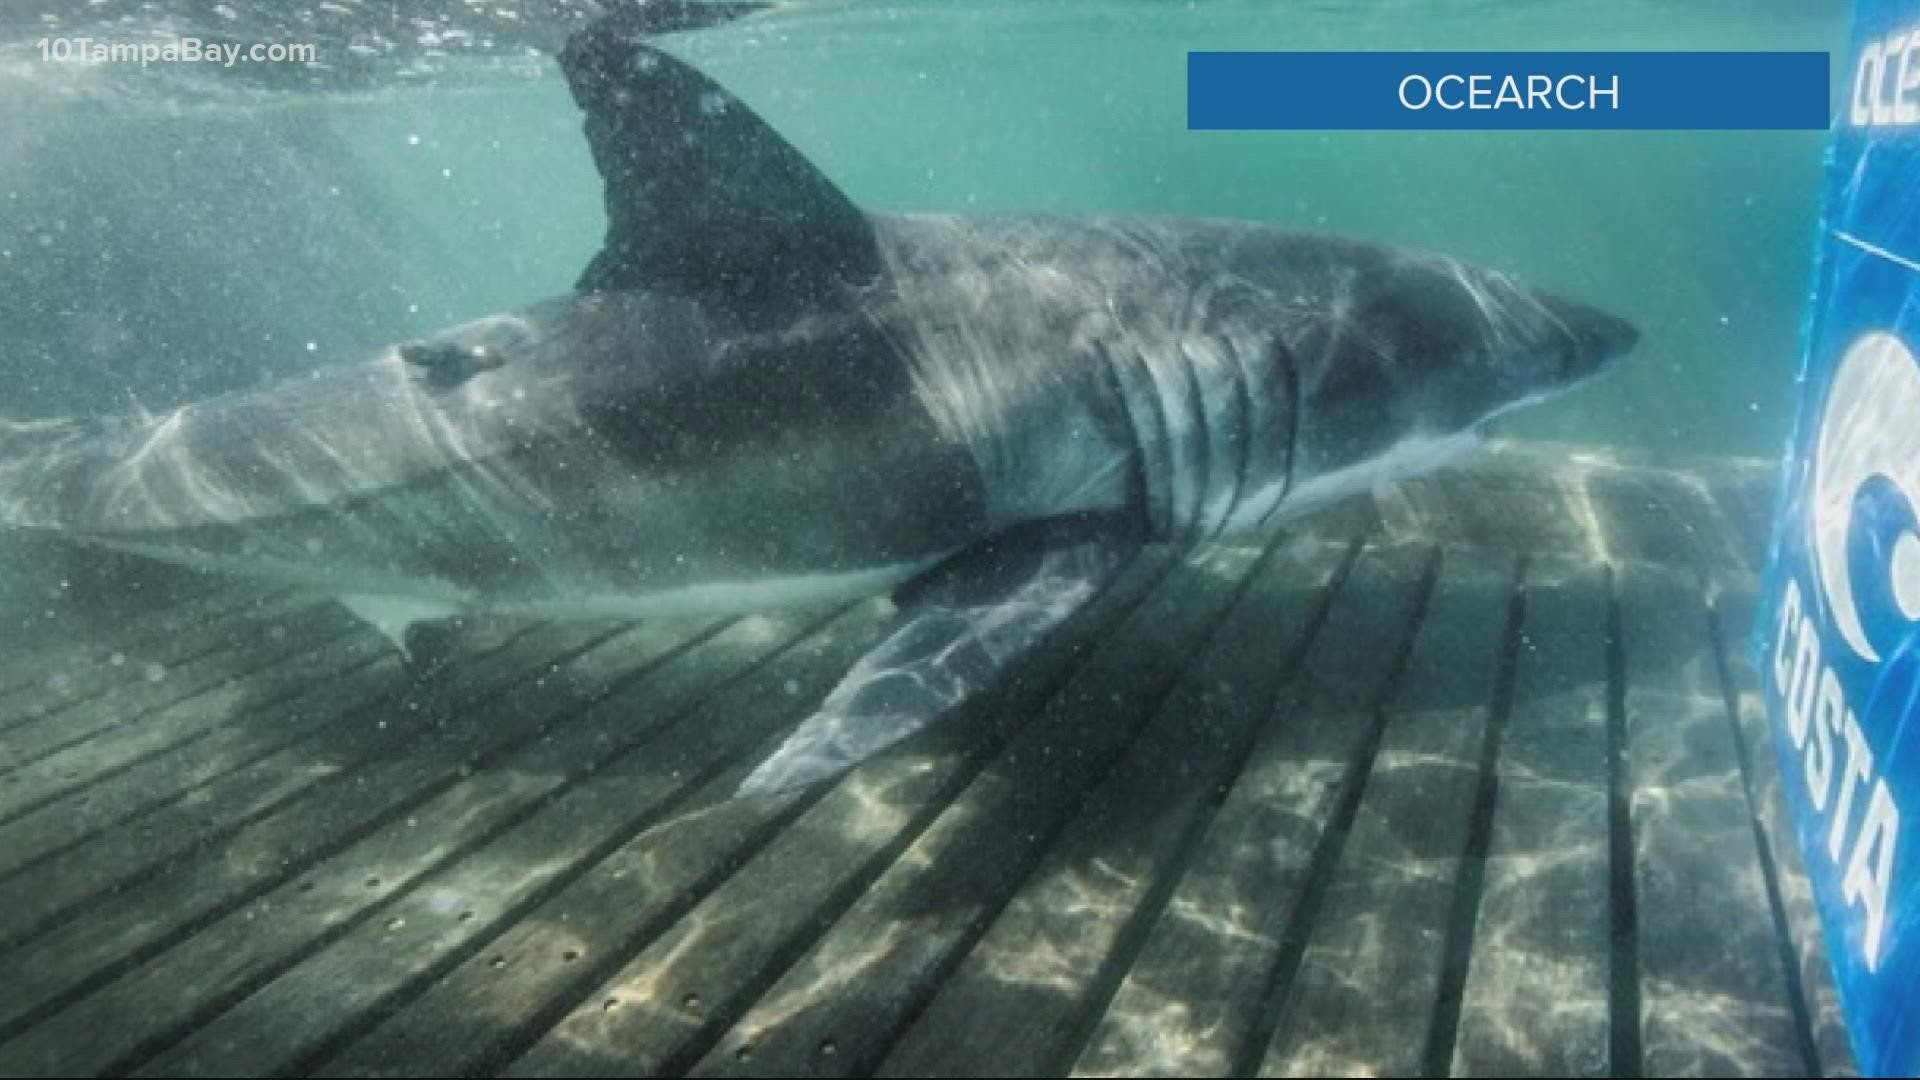 Scientists have been tracking the juvenile shark named Rose since October 2020.